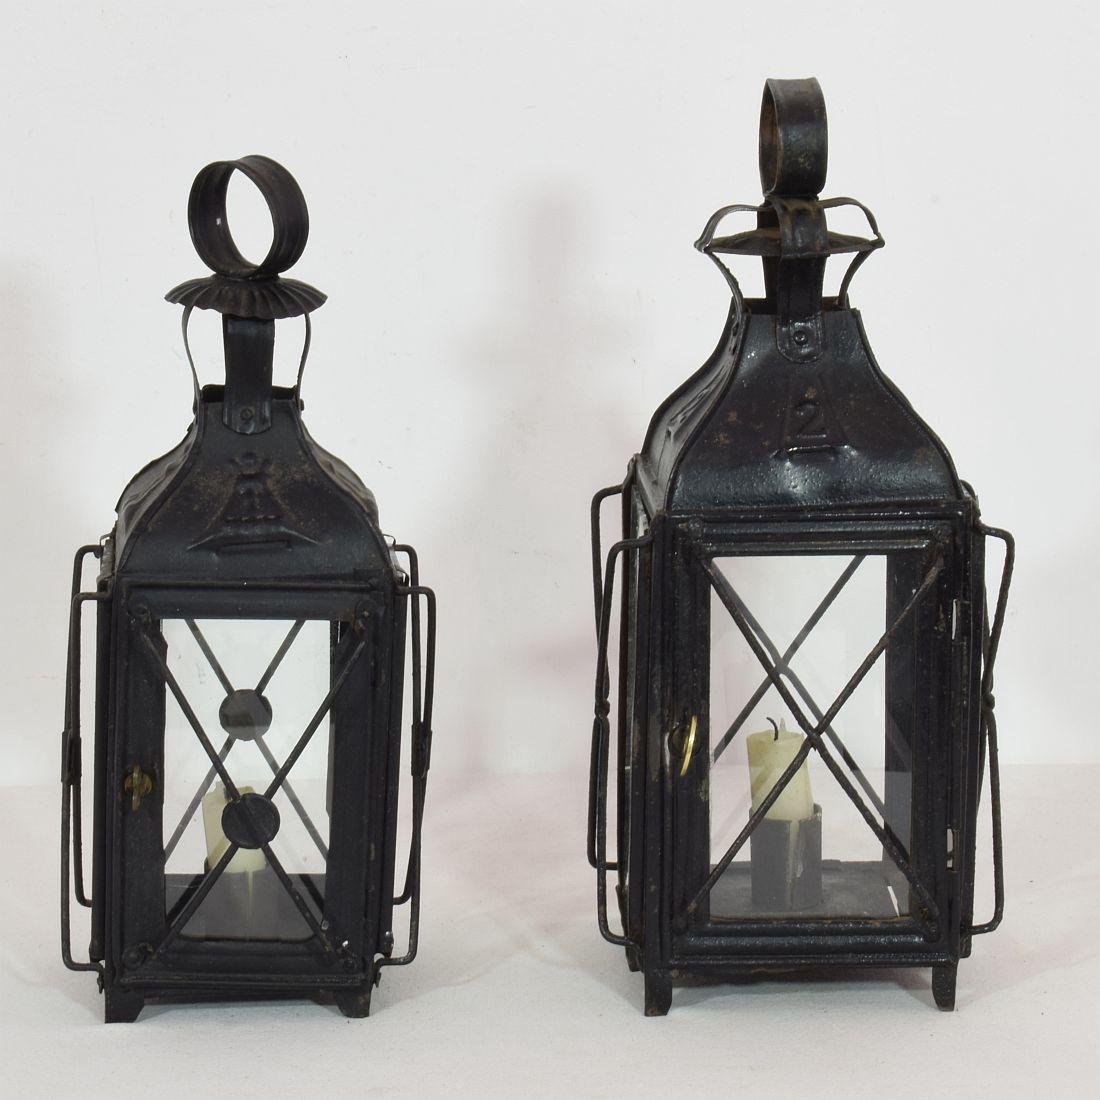 Nice pair of metal lanterns, France, circa 1850-1900.
Weathered and old repairs ( glass once replaced )
Measures: H:27,5-30cm W:12-13,5cm D:12-13,5cm
Measurement here below of the largest lantern.